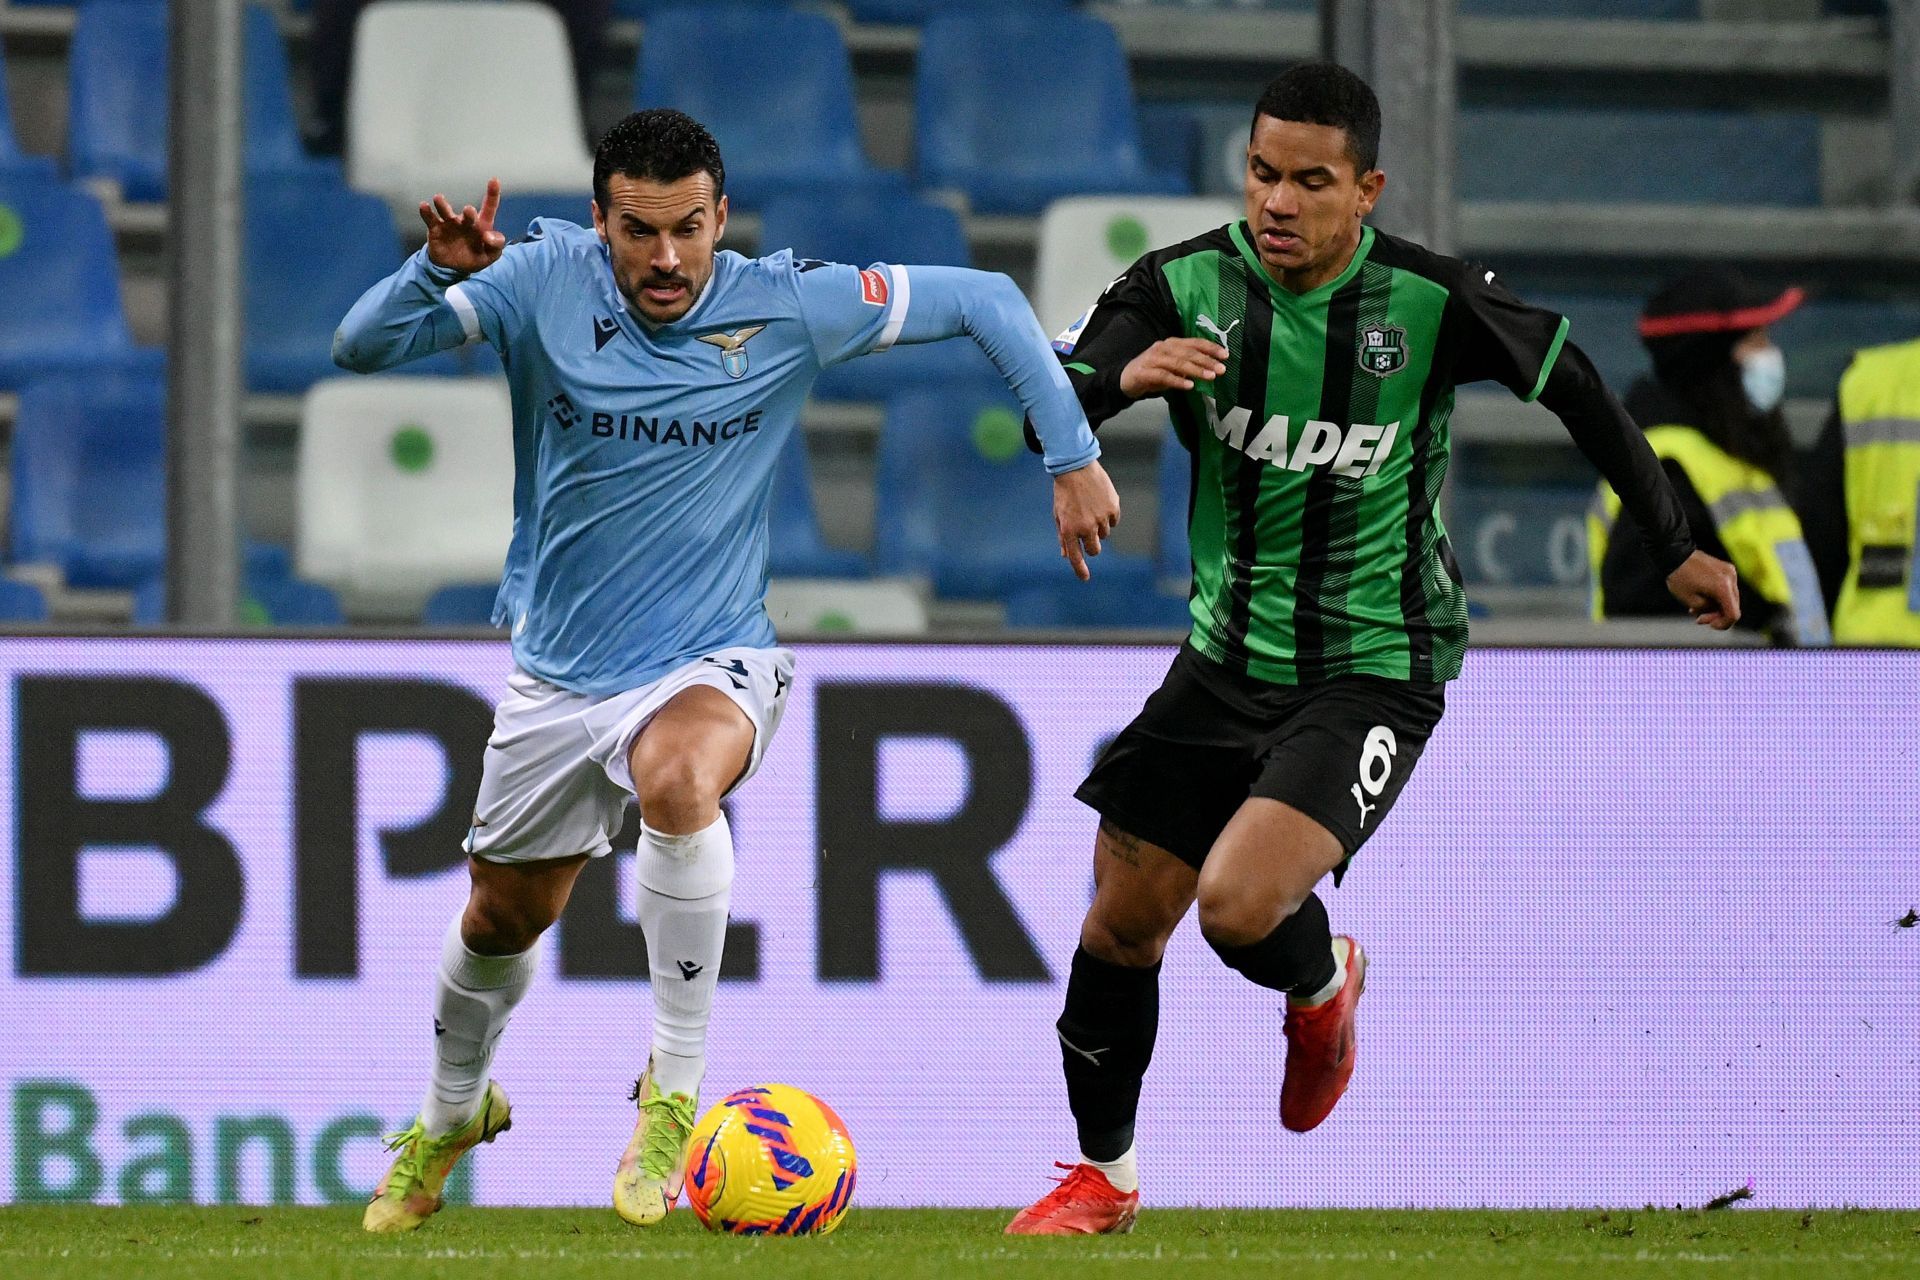 Lazio and Sassuolo face off in their upcoming Serie A fixture on Saturday